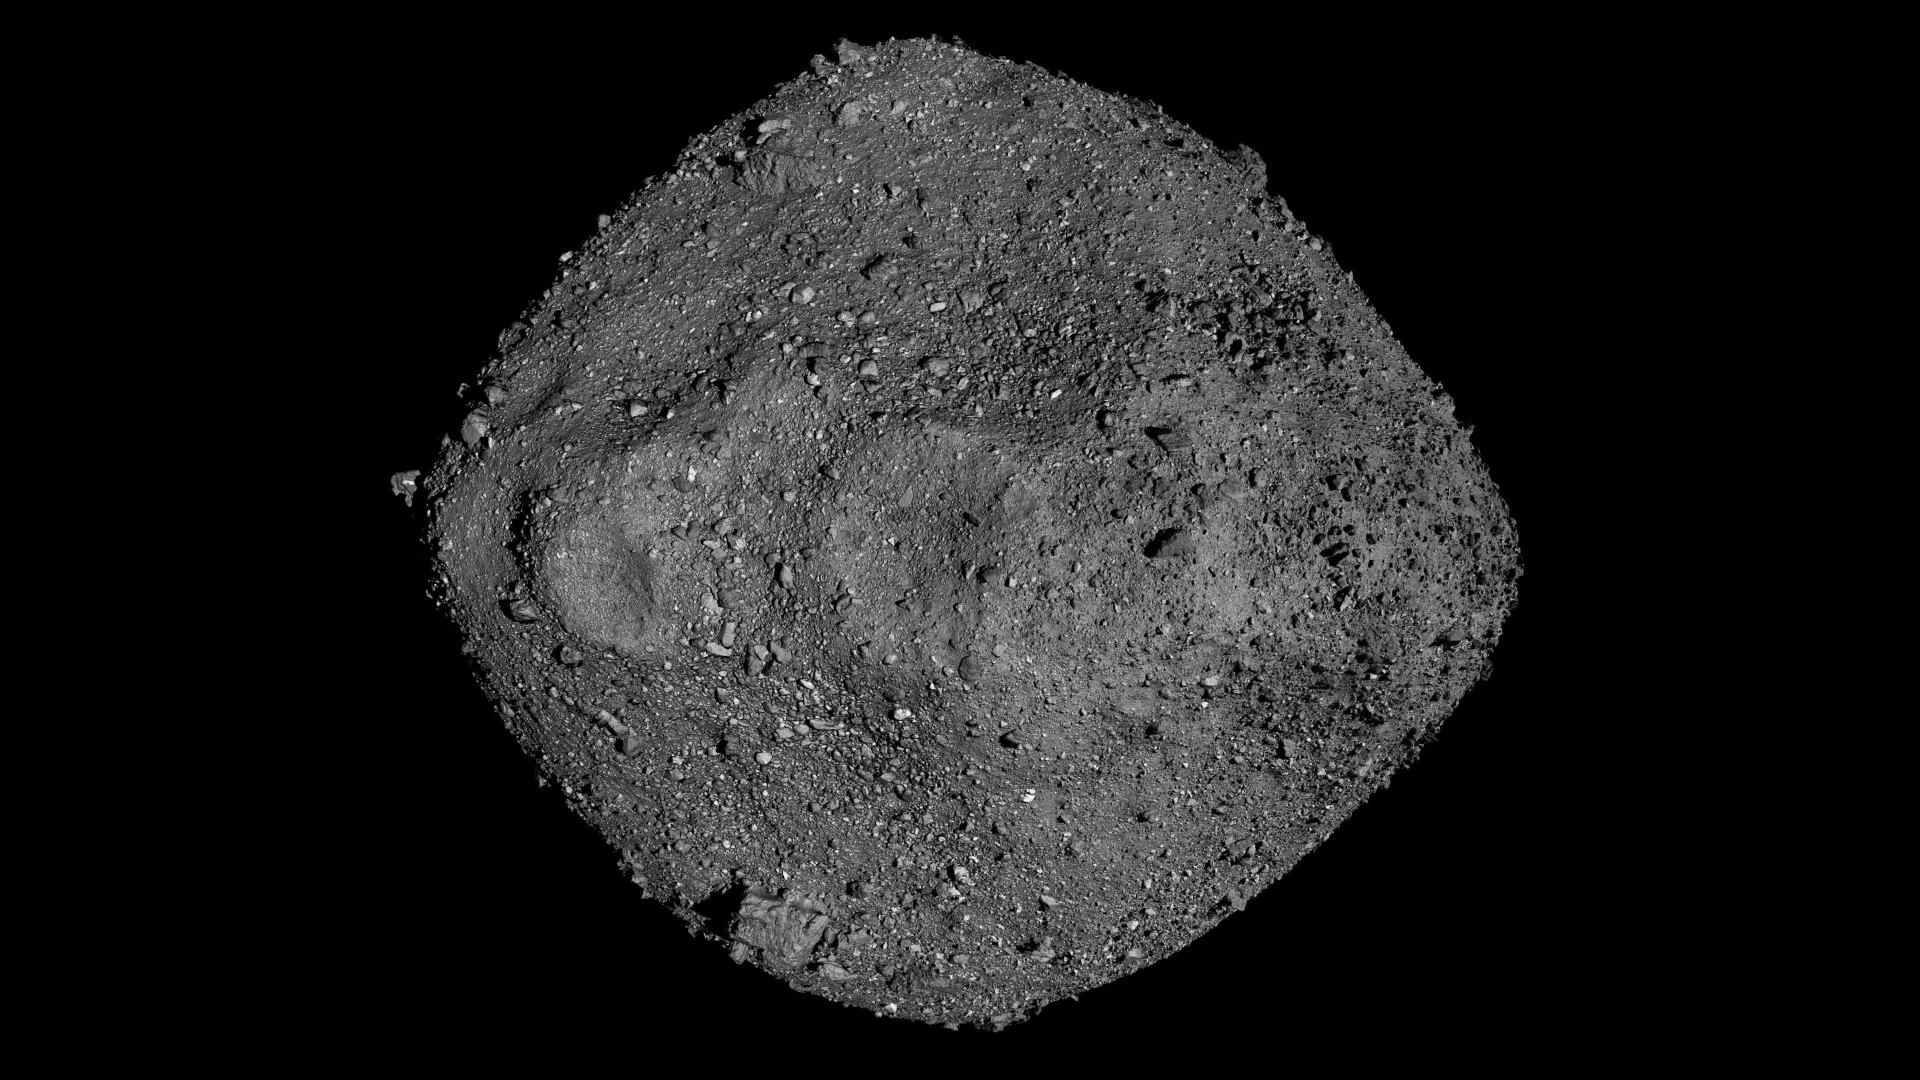 Could we defend Earth against a ‘rubble pile’ asteroid? Space